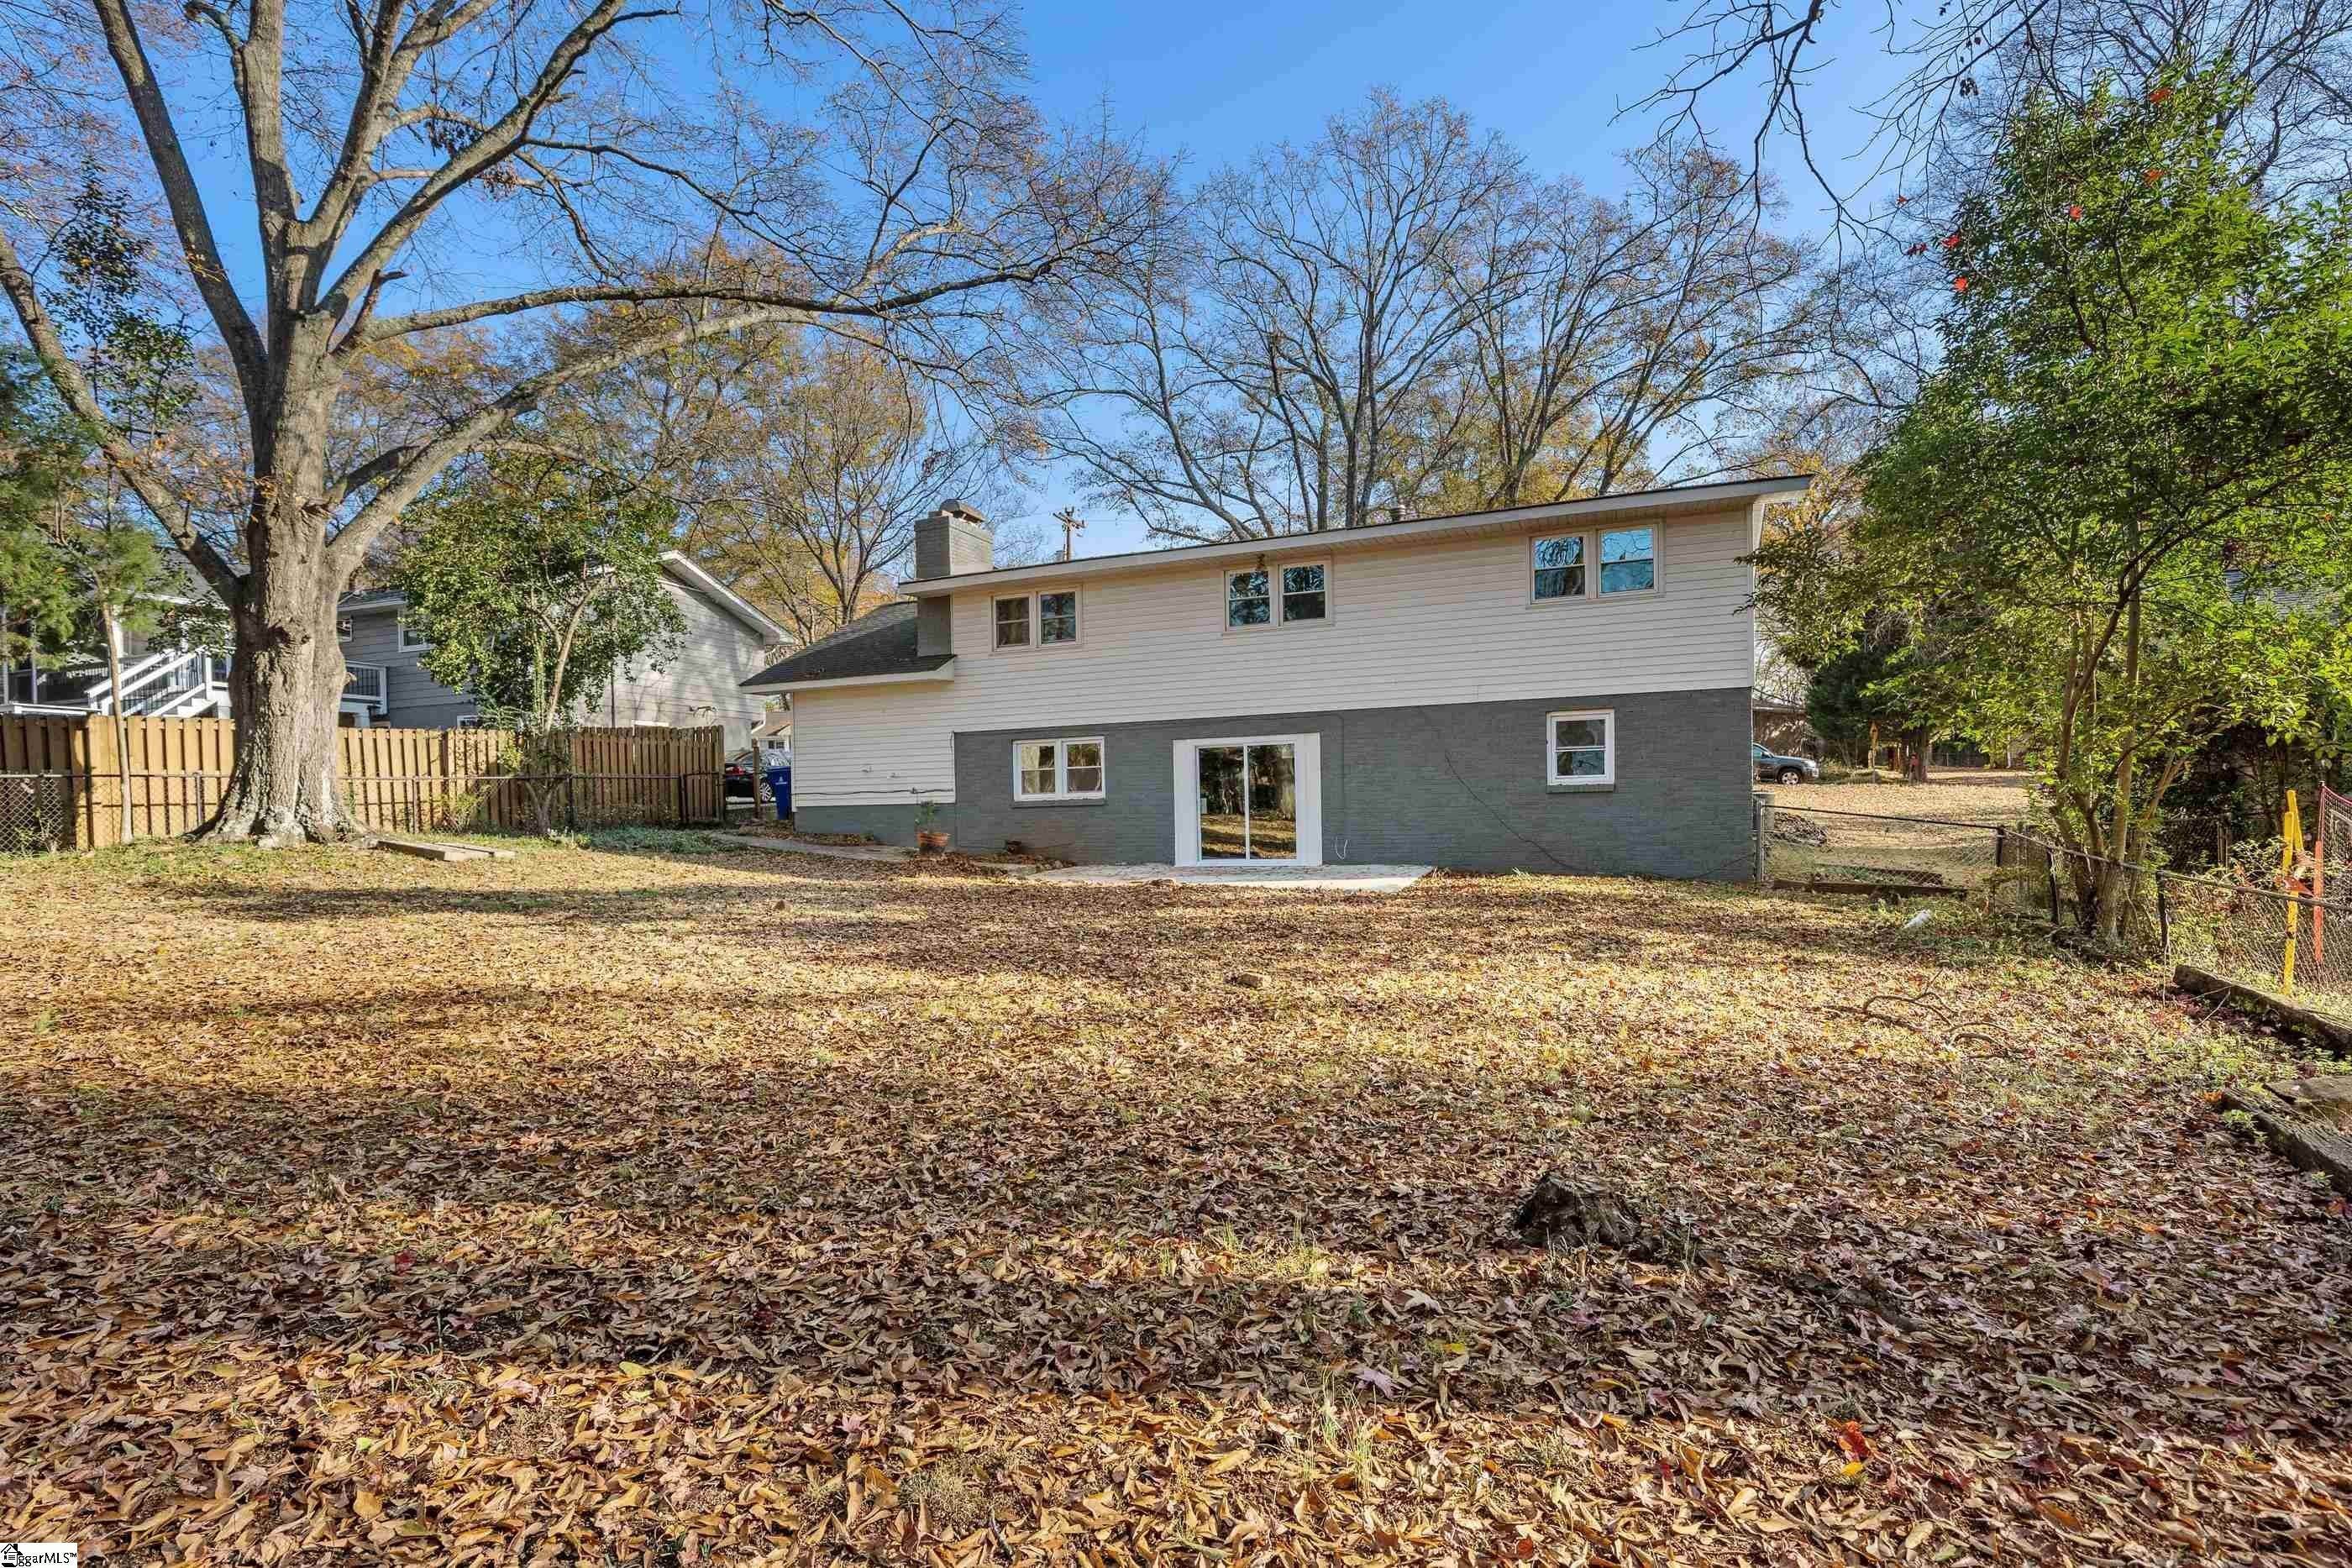 29. Single Family for Sale at Greenville, SC 29607